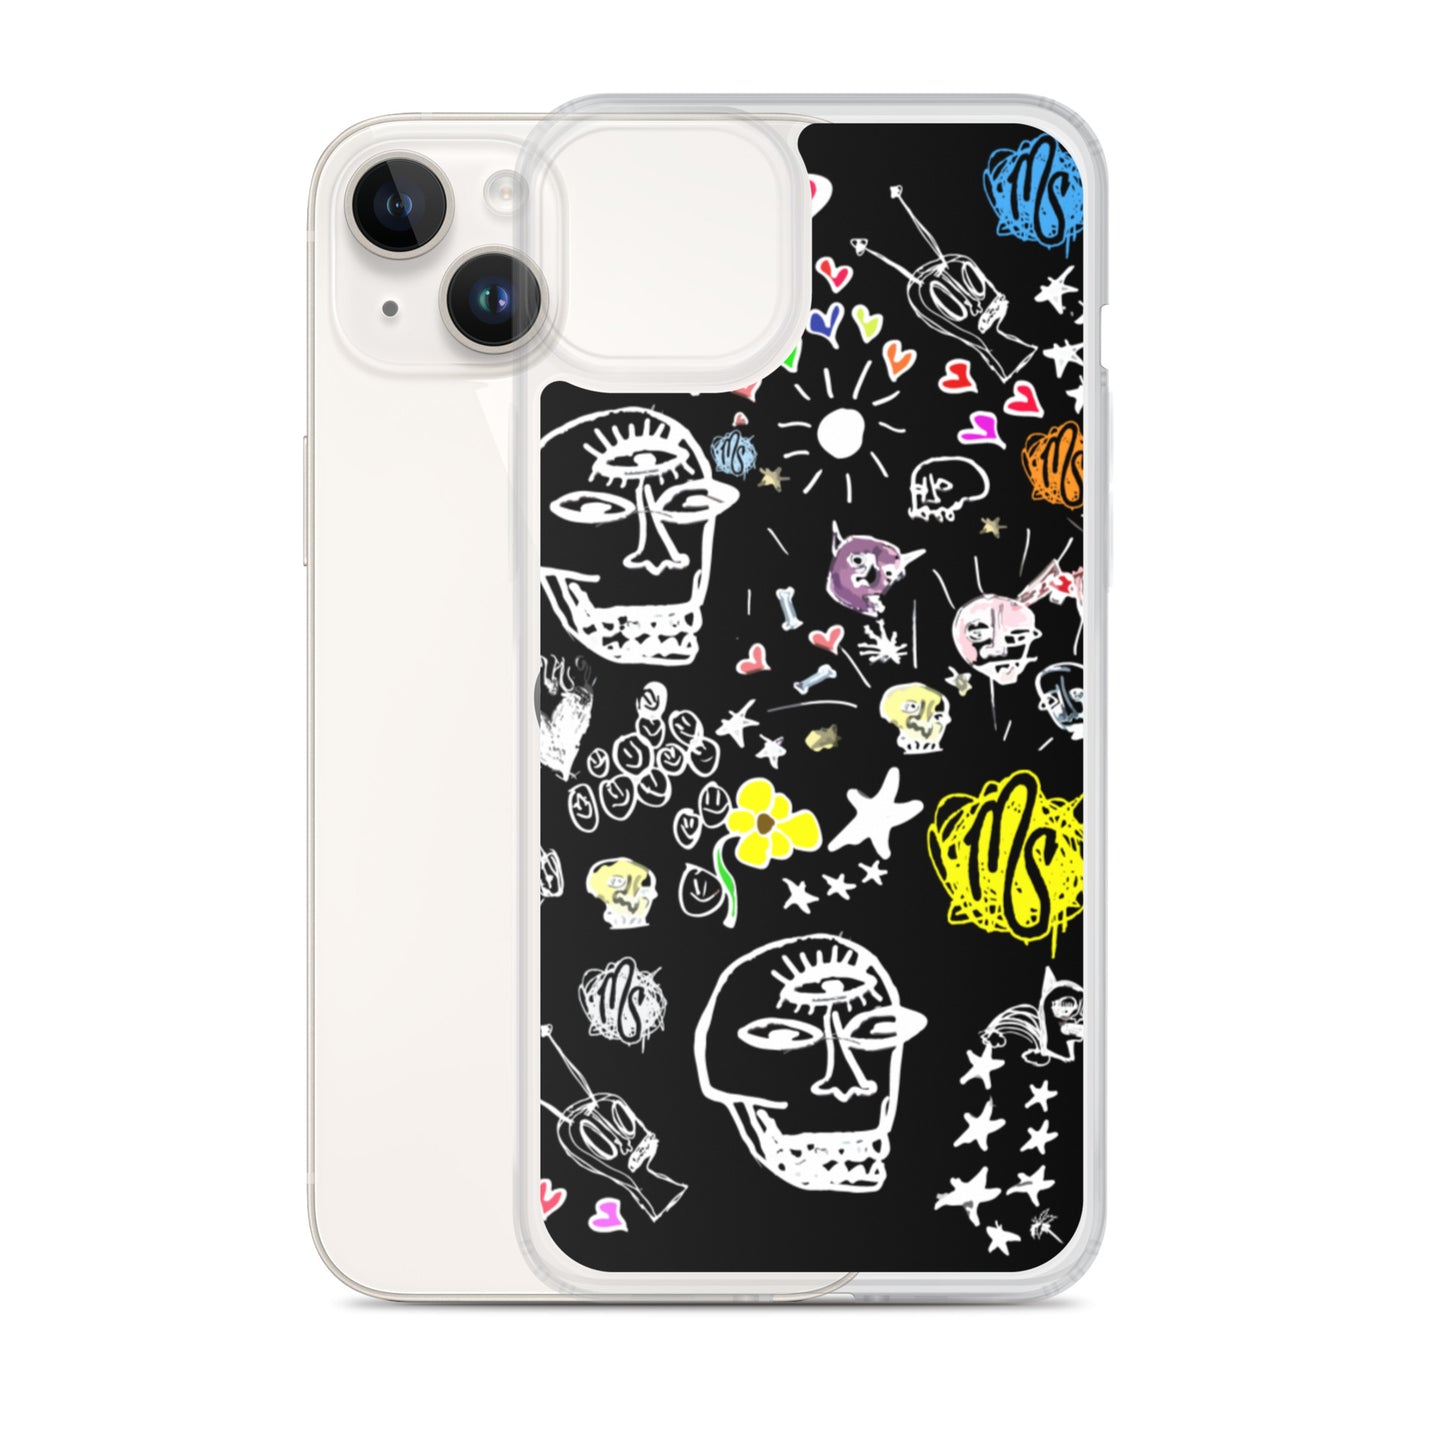 Art All Over Black iPhone Case